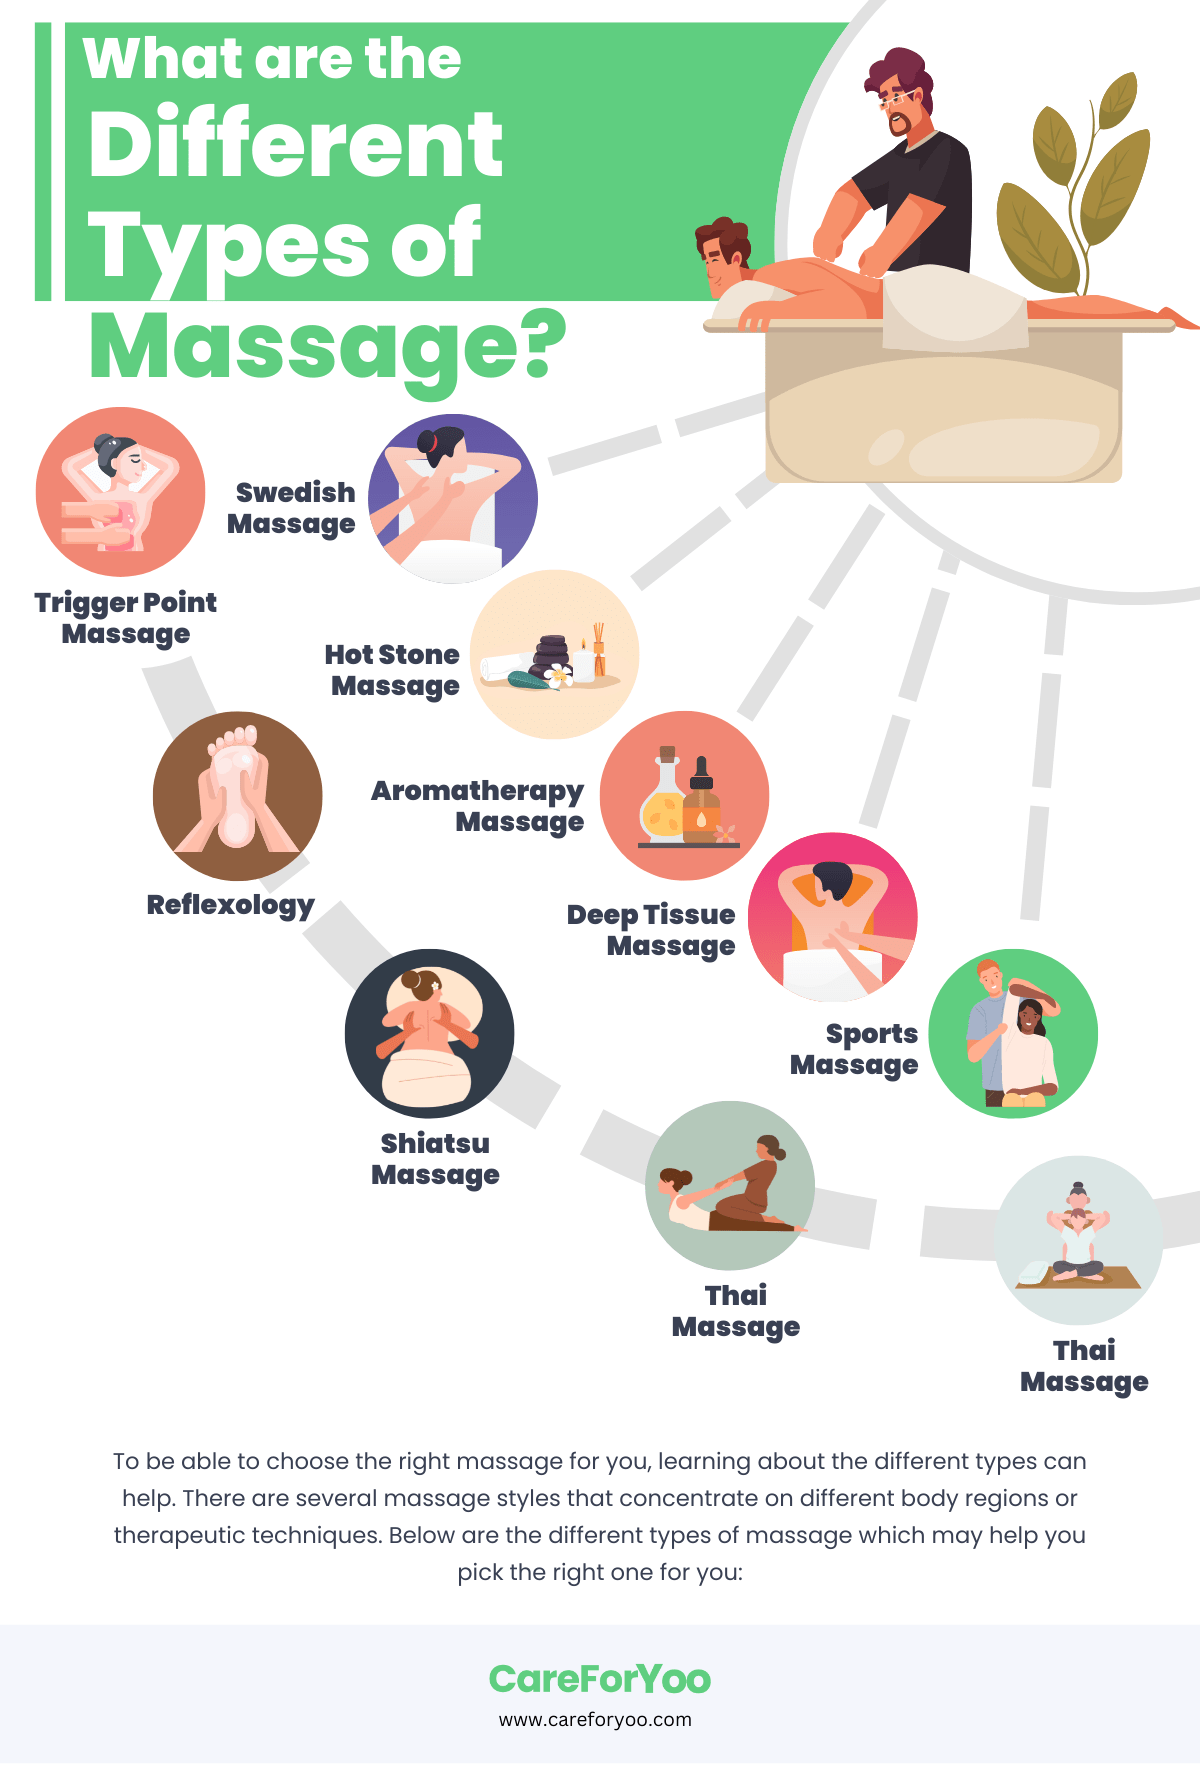 What are the Different Types of Massage